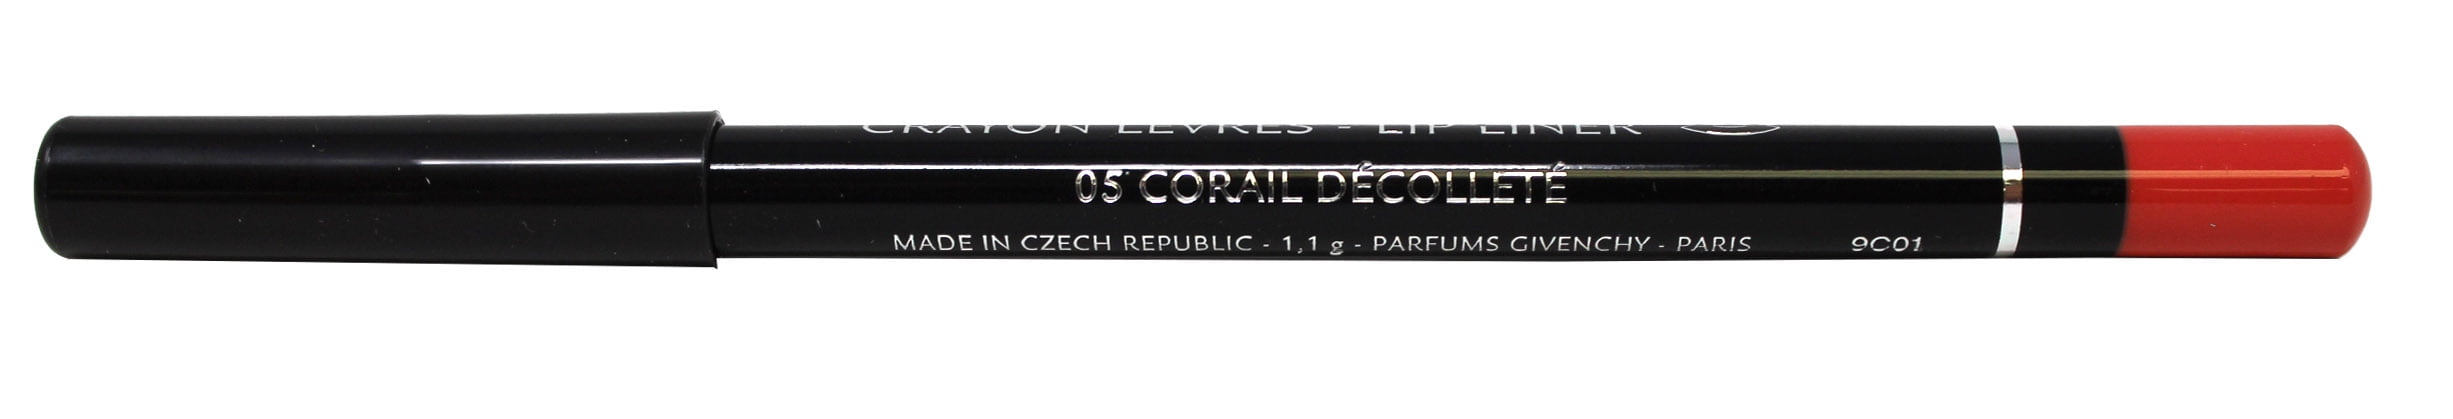 Givenchy Lip Liner With Sharpener #05 Corail Decollete 0.03 Ounces 